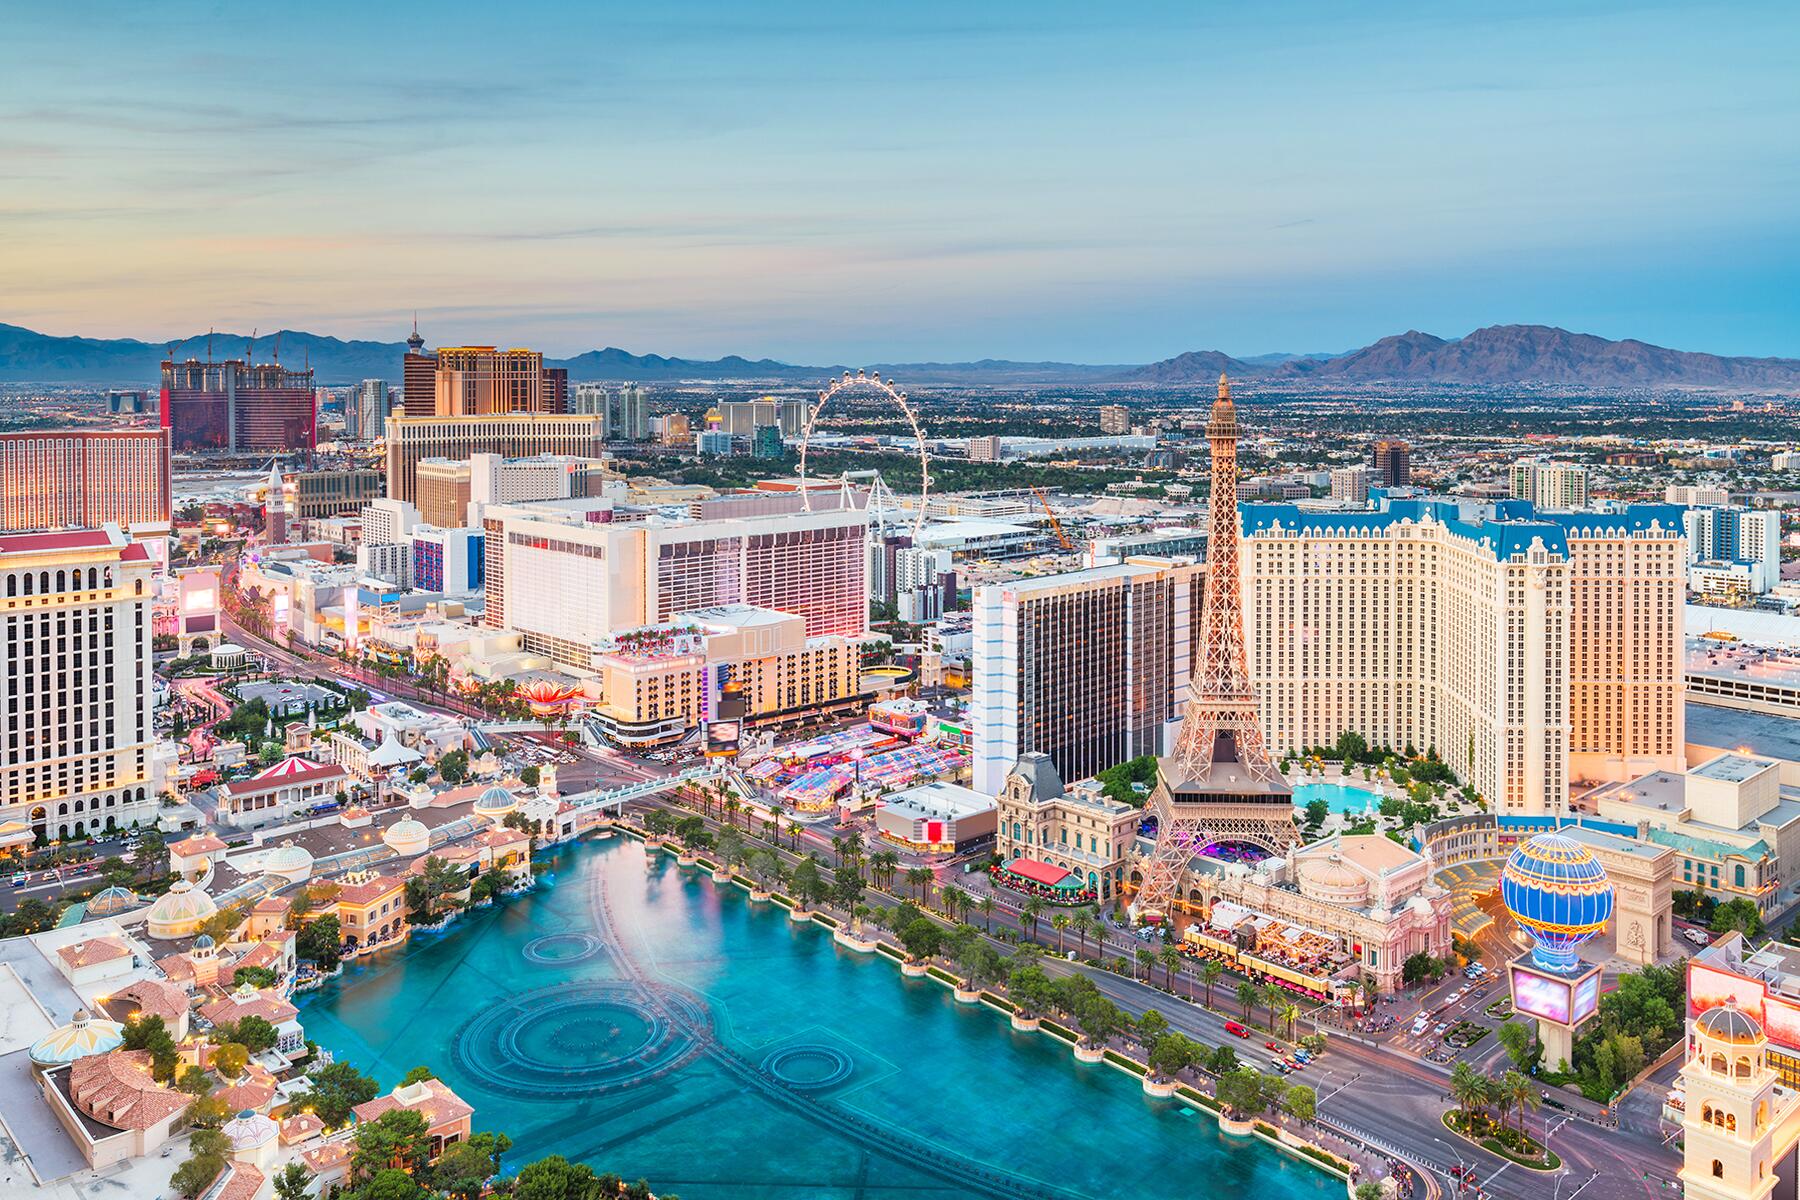 Las Vegas Travel Guide - Expert Picks for your Vacation